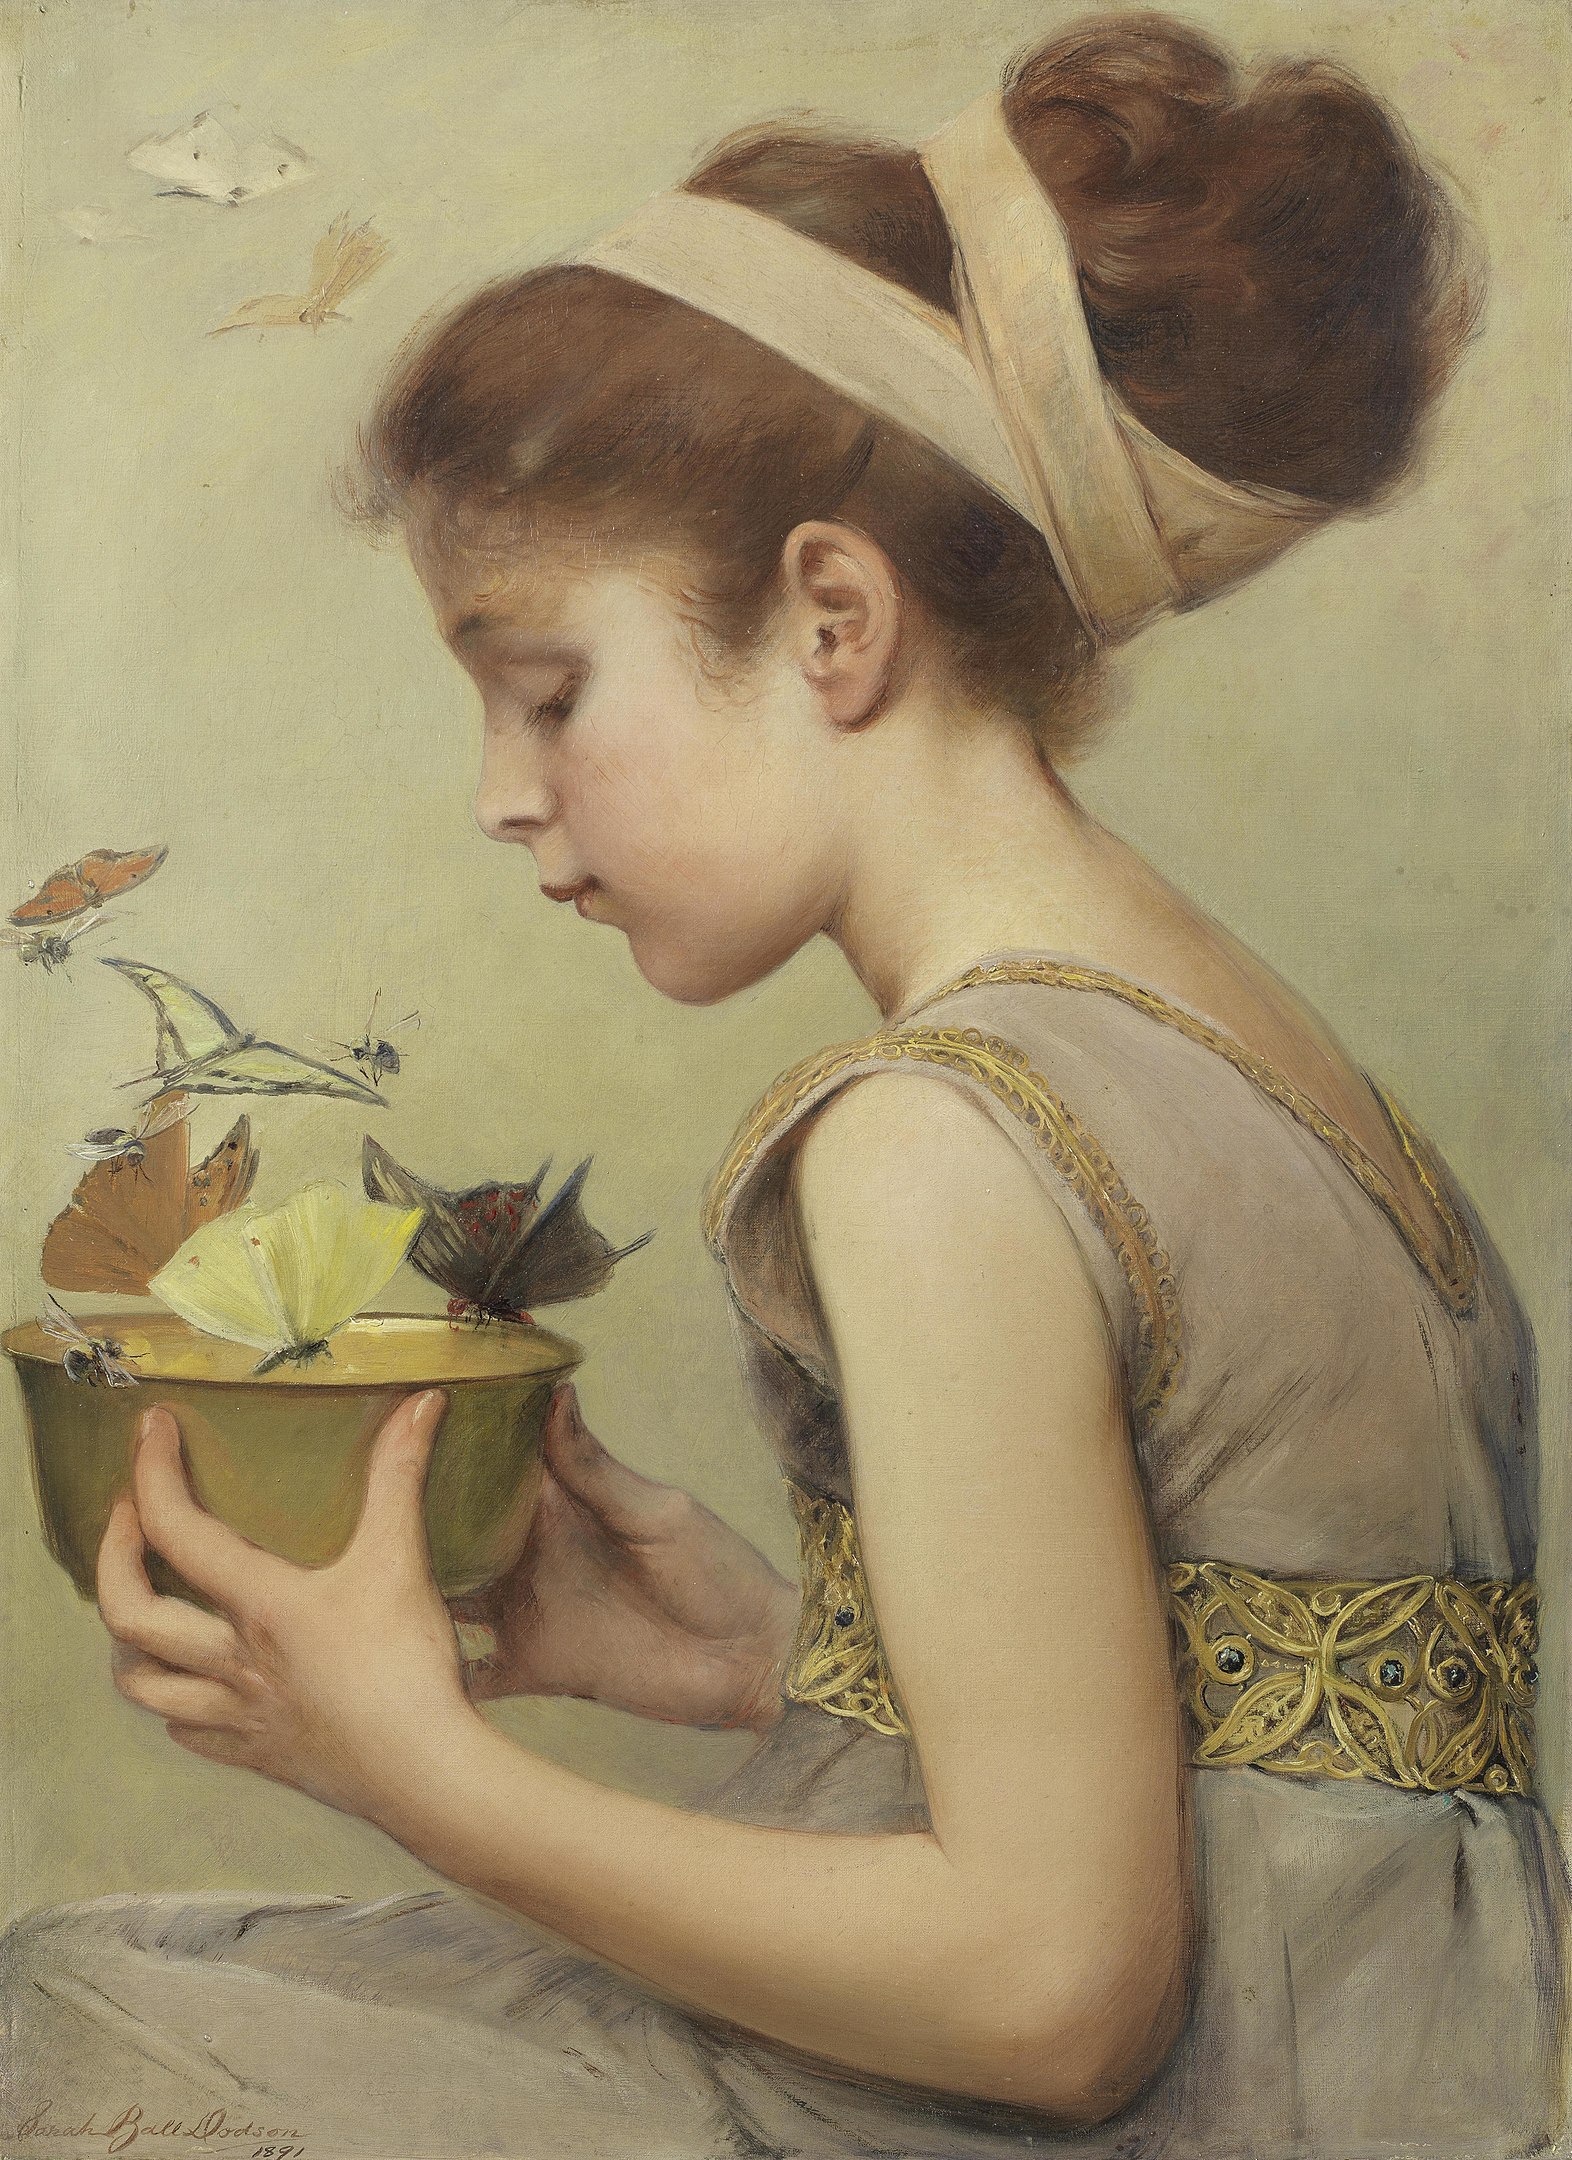 A side view of a young girl holding a bowl upon which moths and bees are perched